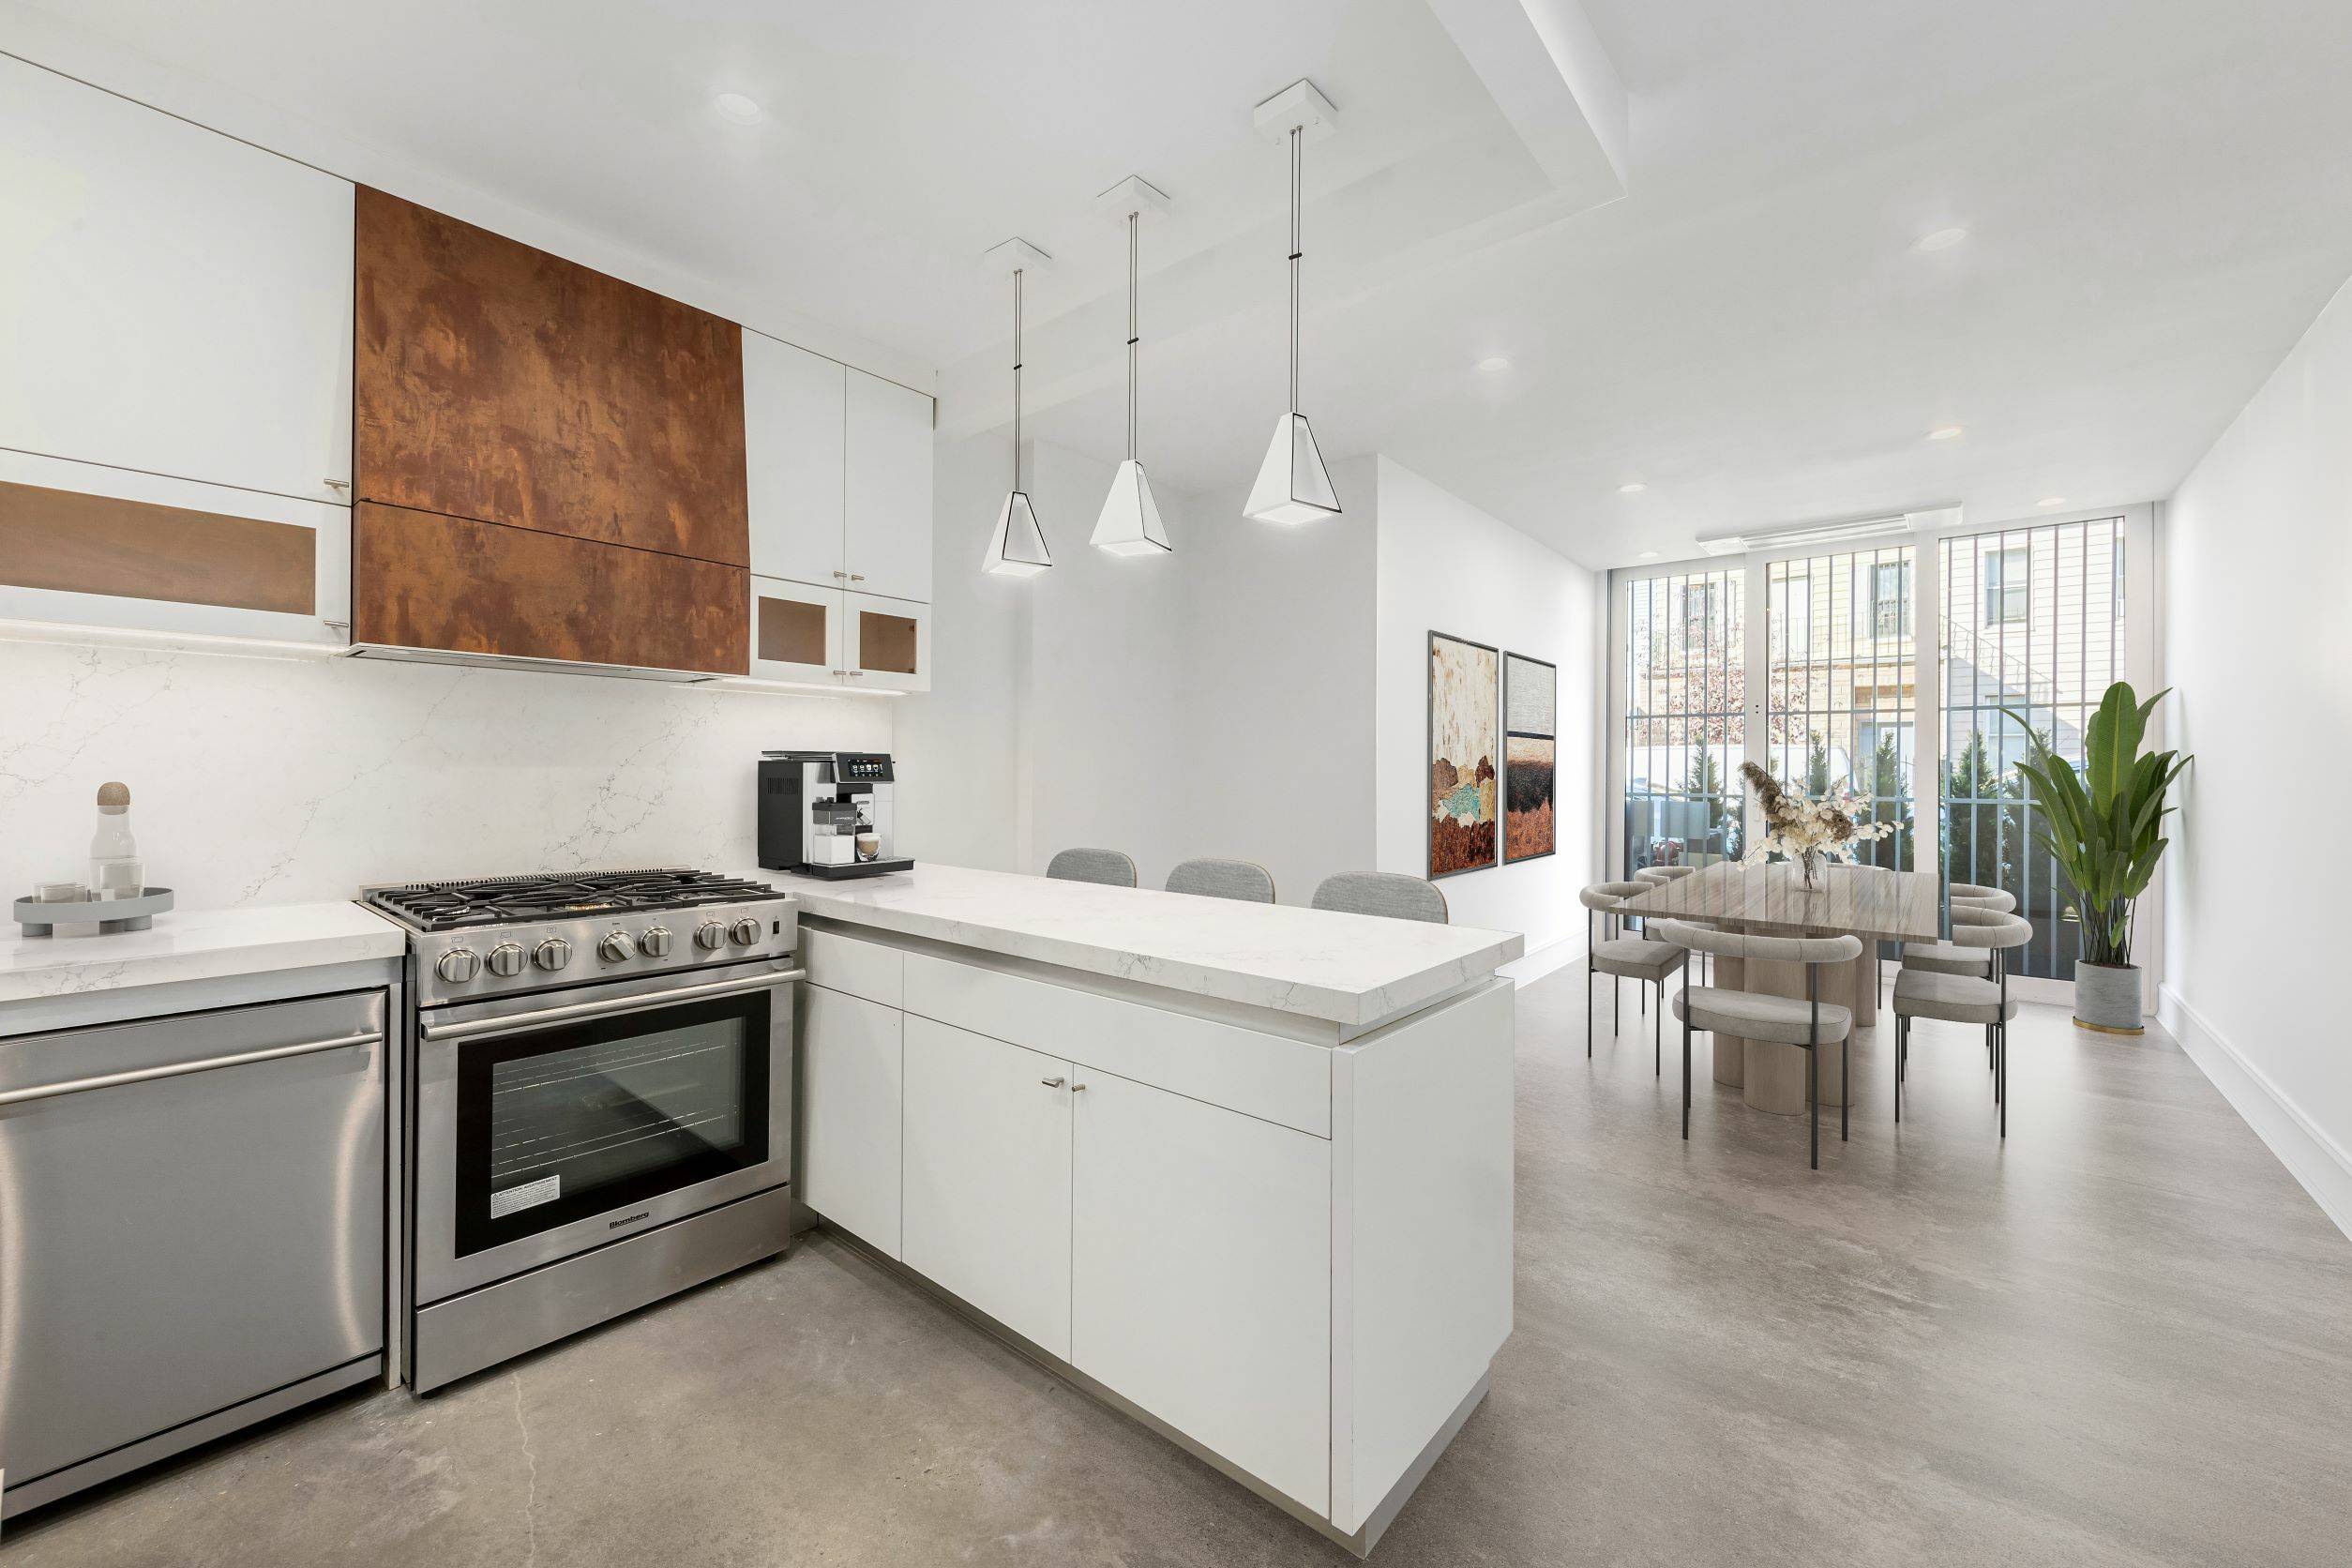 Introducing this brand new Bushwick duplex suffused with natural light, a chic 3 bedroom, 1.